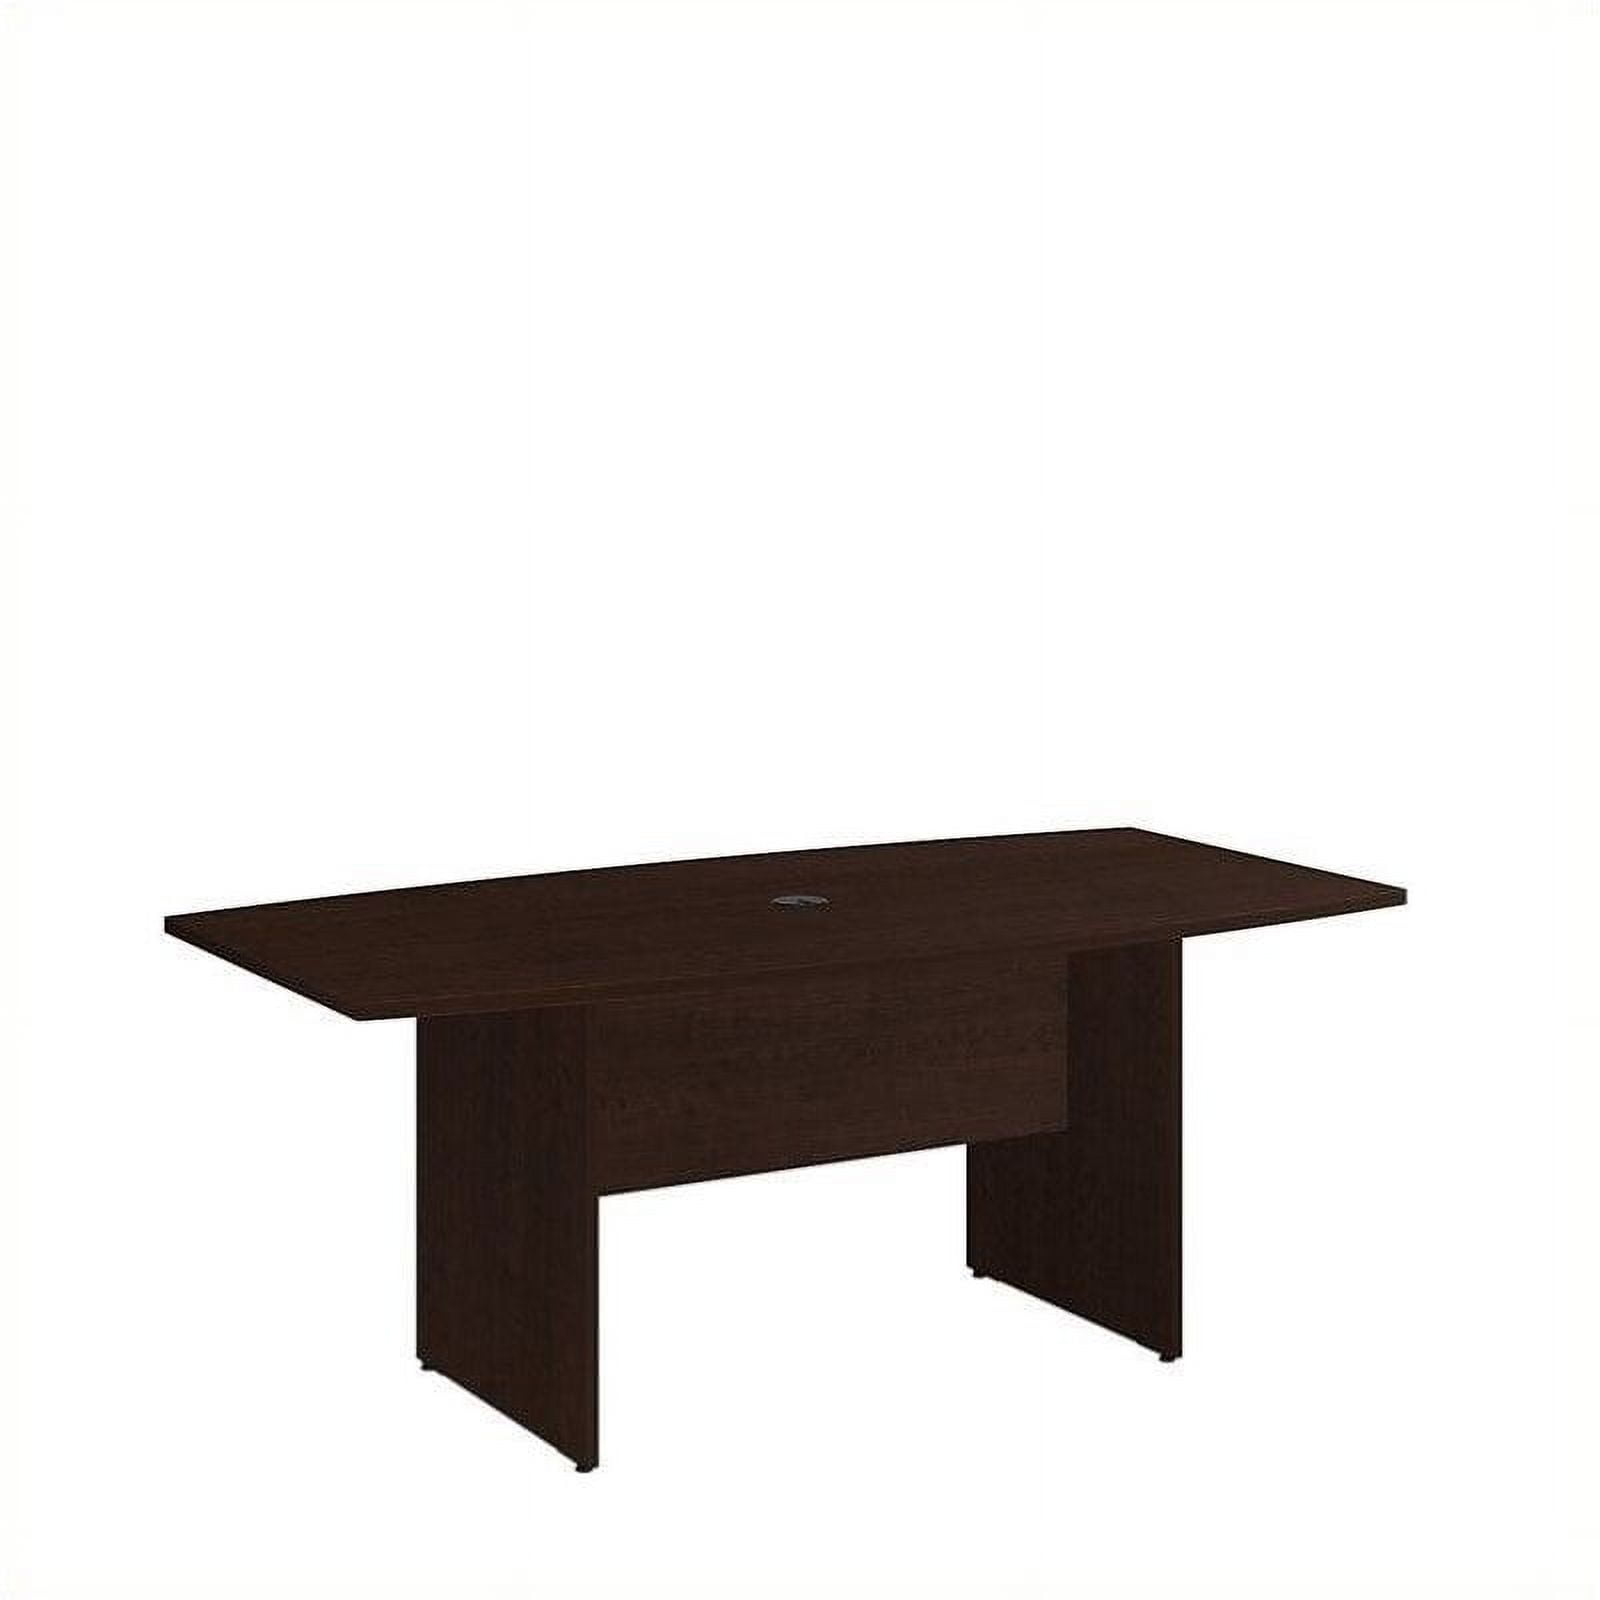 Picture of Bush Business Furniture 99TB7236MR 72 x 36 in. Boat Shaped Conference Table with Wood Base - Mocha Cherry